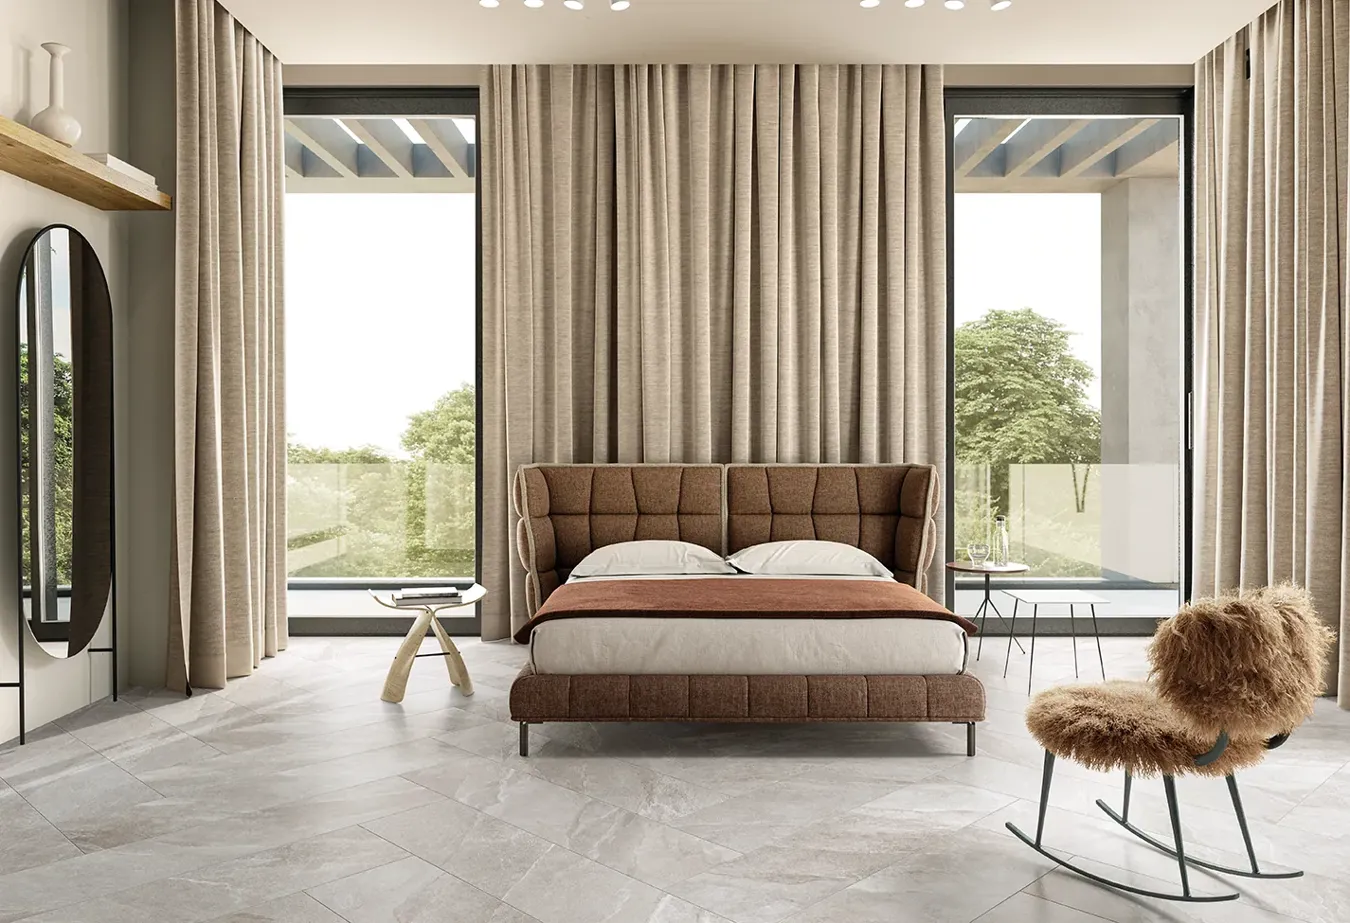 Chic bedroom featuring Ubik collection's greige stone-effect tiles, a plush brown bed, and matching curtains.